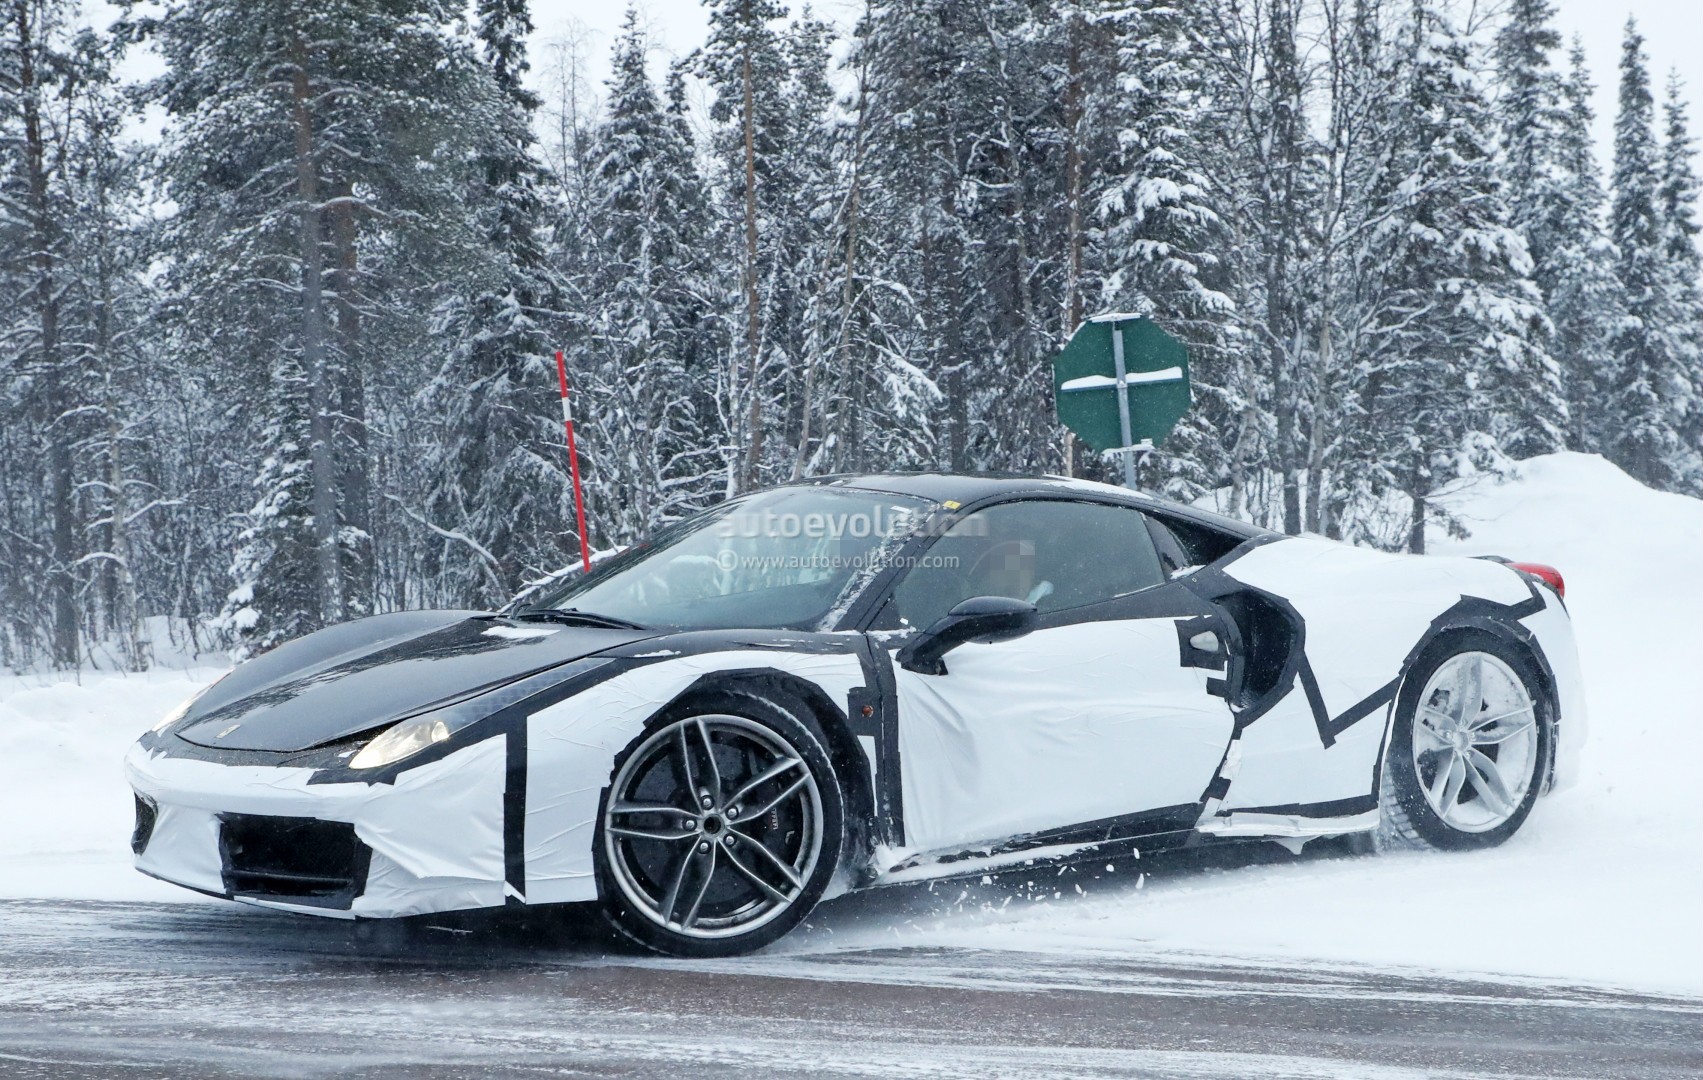 2019 - [Ferrari] Roma [F169] - Page 2 New-ferrari-dino-spied-testing-in-sweden-as-458-test-mule-with-v6-soundtrack_4